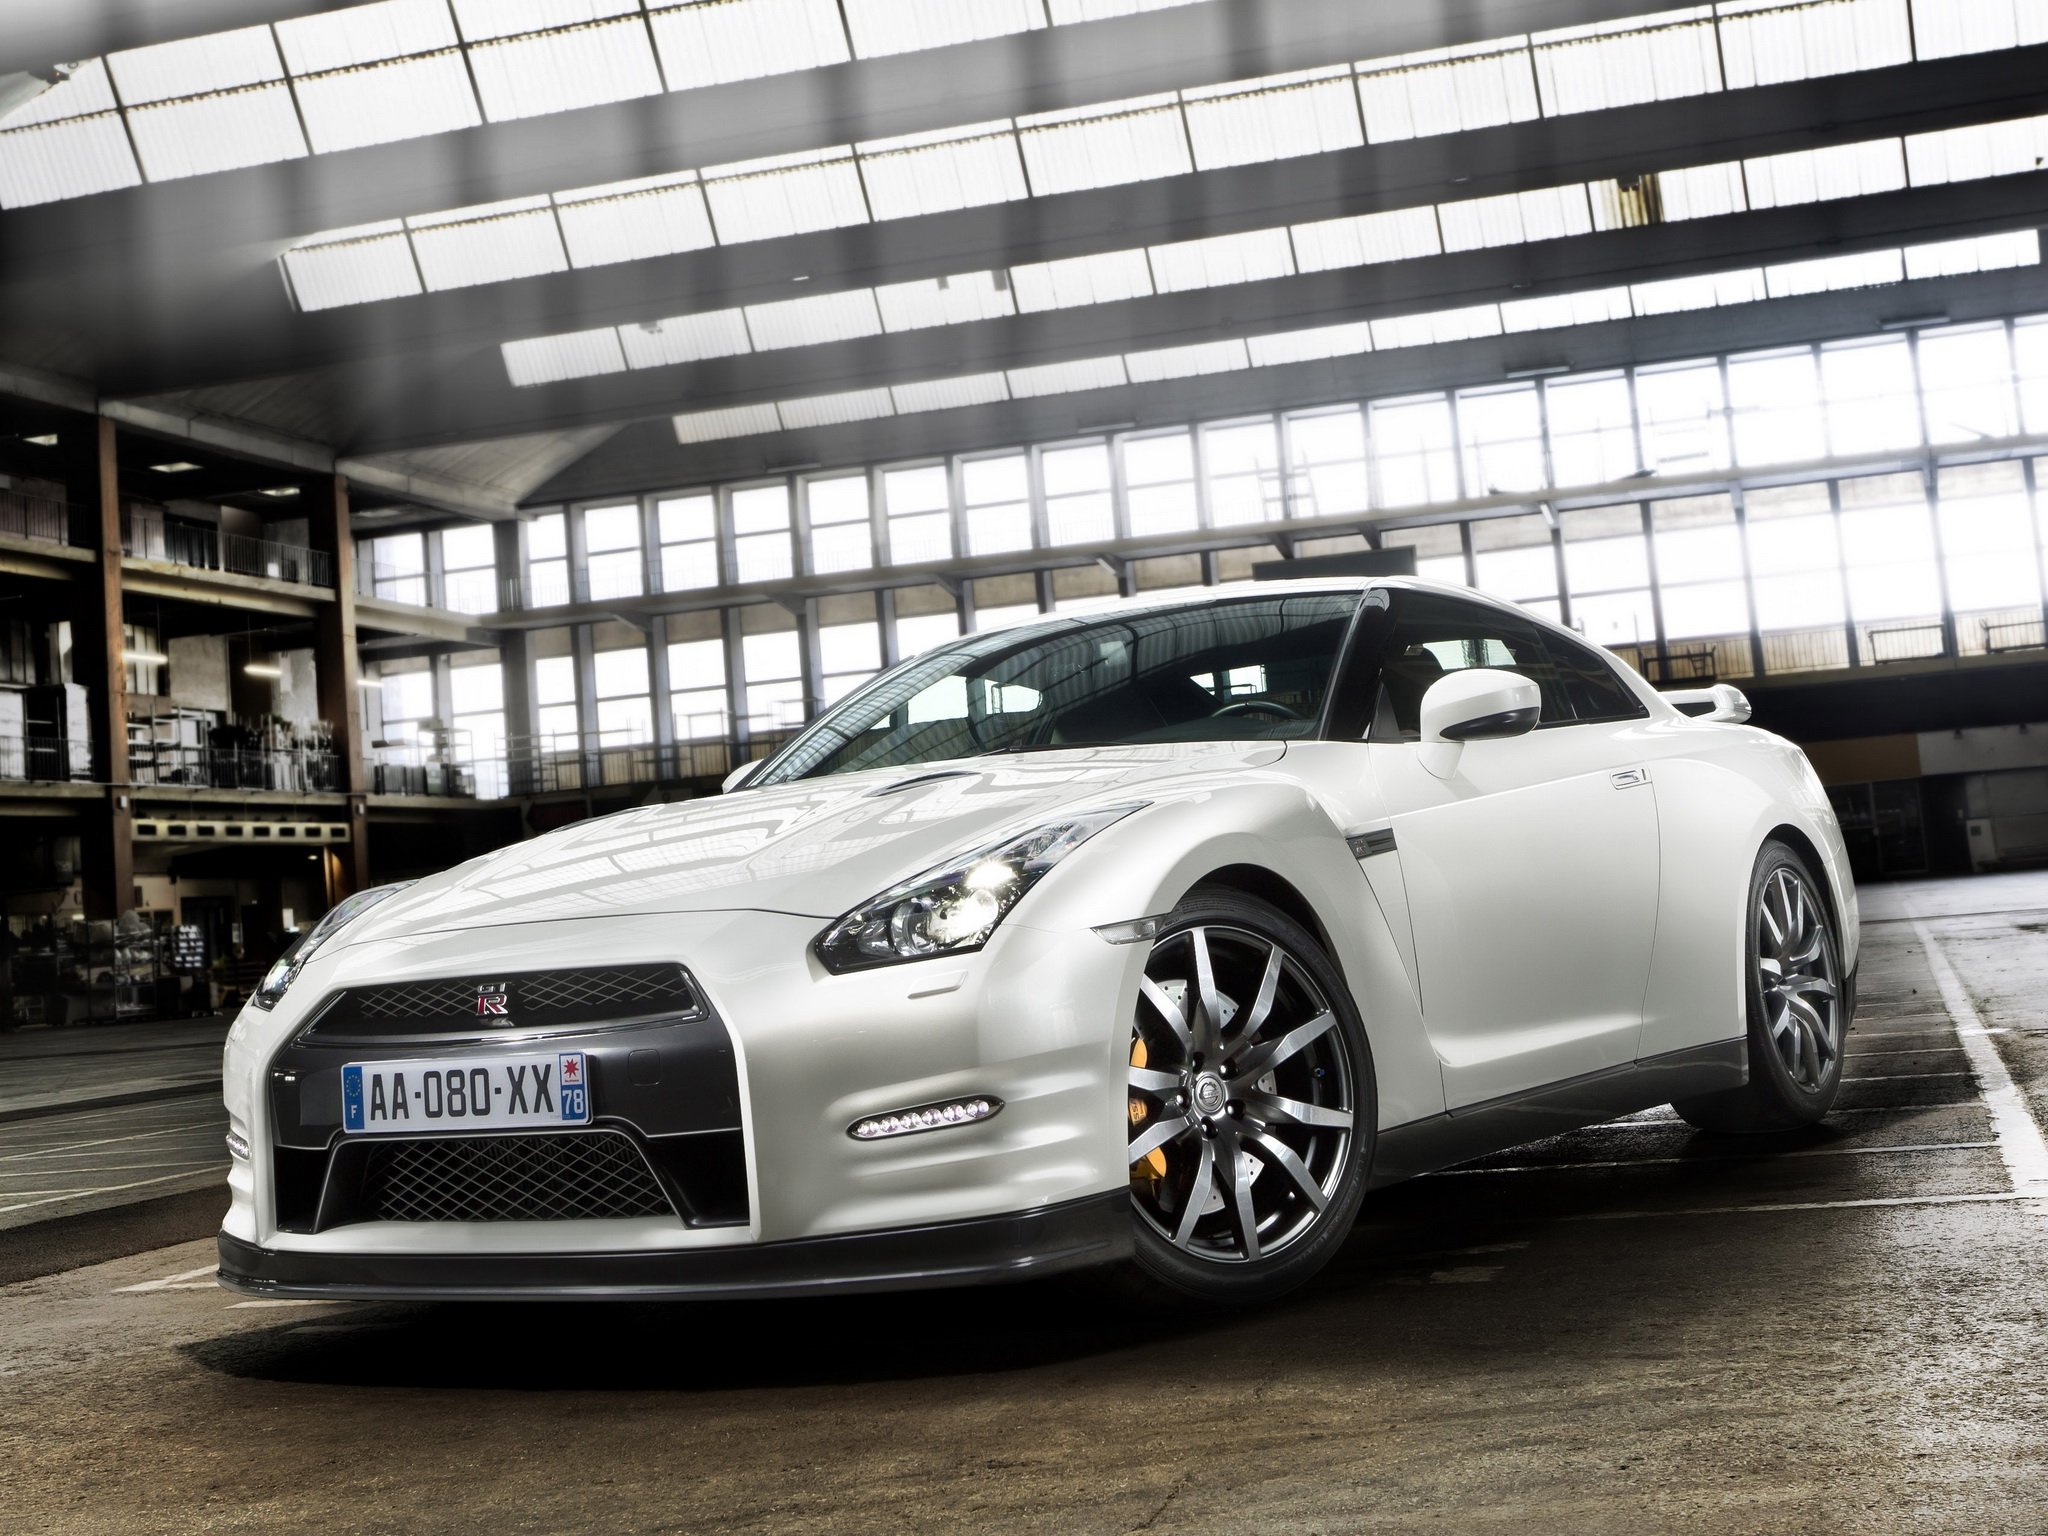 nissan, Gt r, Black, Edition, R35, Cars, Coupe, 2010 Wallpaper